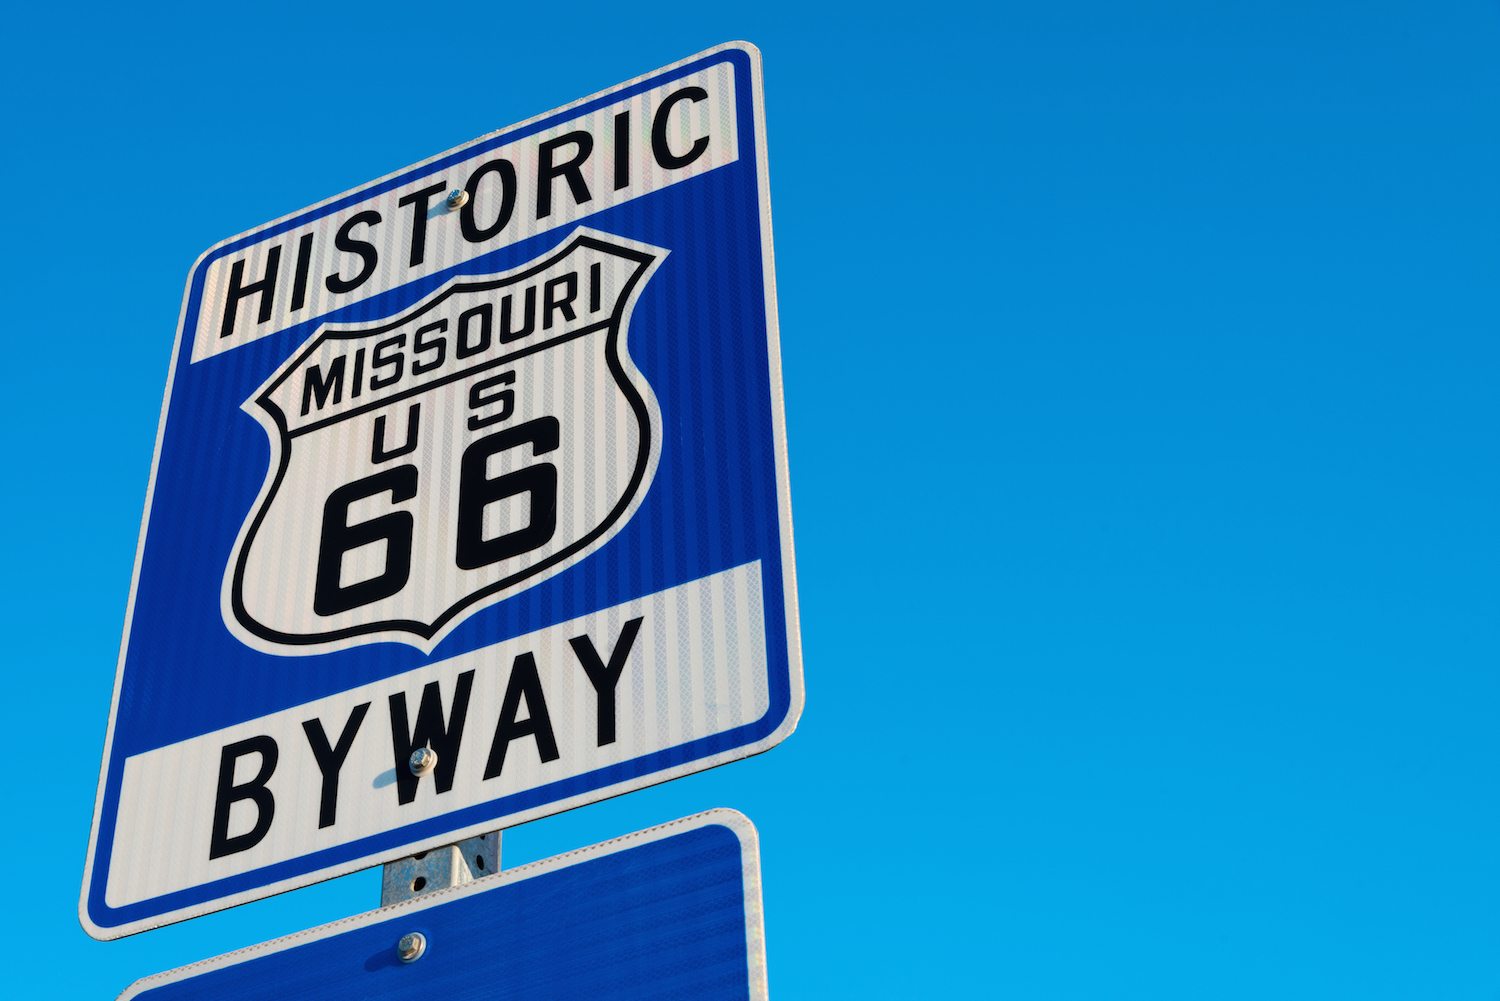 Top Attractions Along Historic Route 66 in Missouri